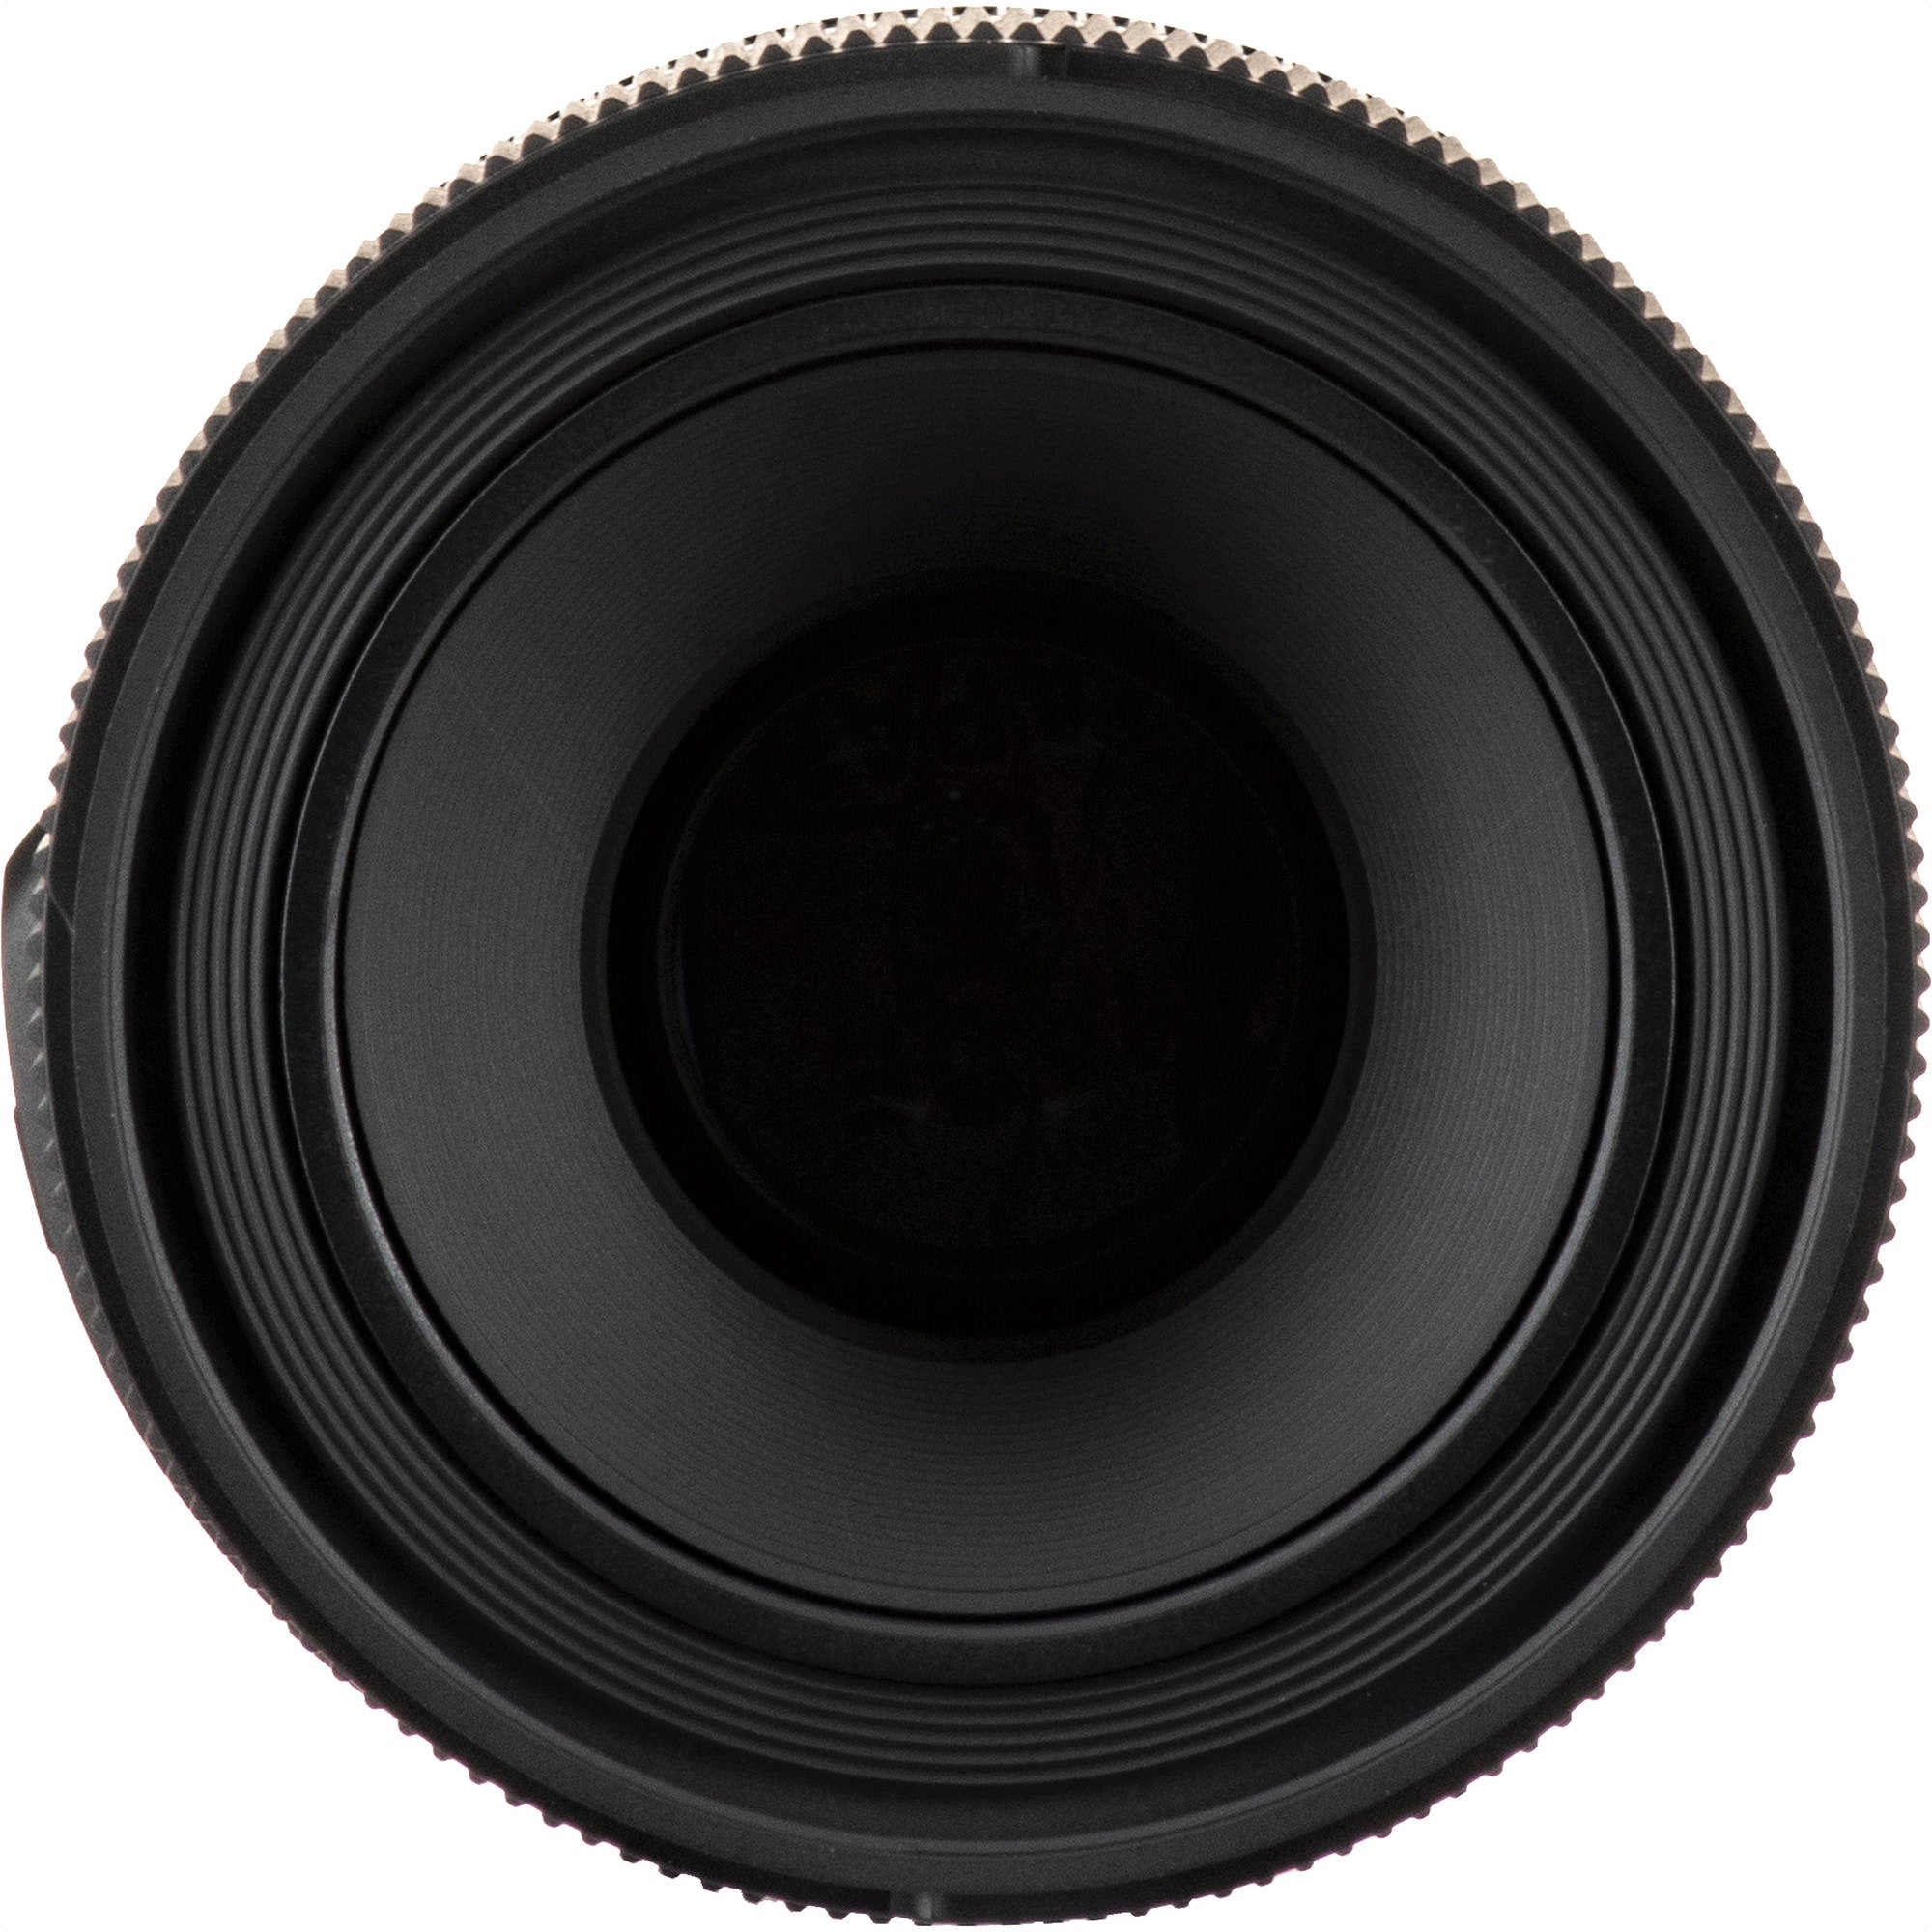 Sigma 70mm F2.8 DG Macro Art Lens for Sigma SA in a Front Close-Up View